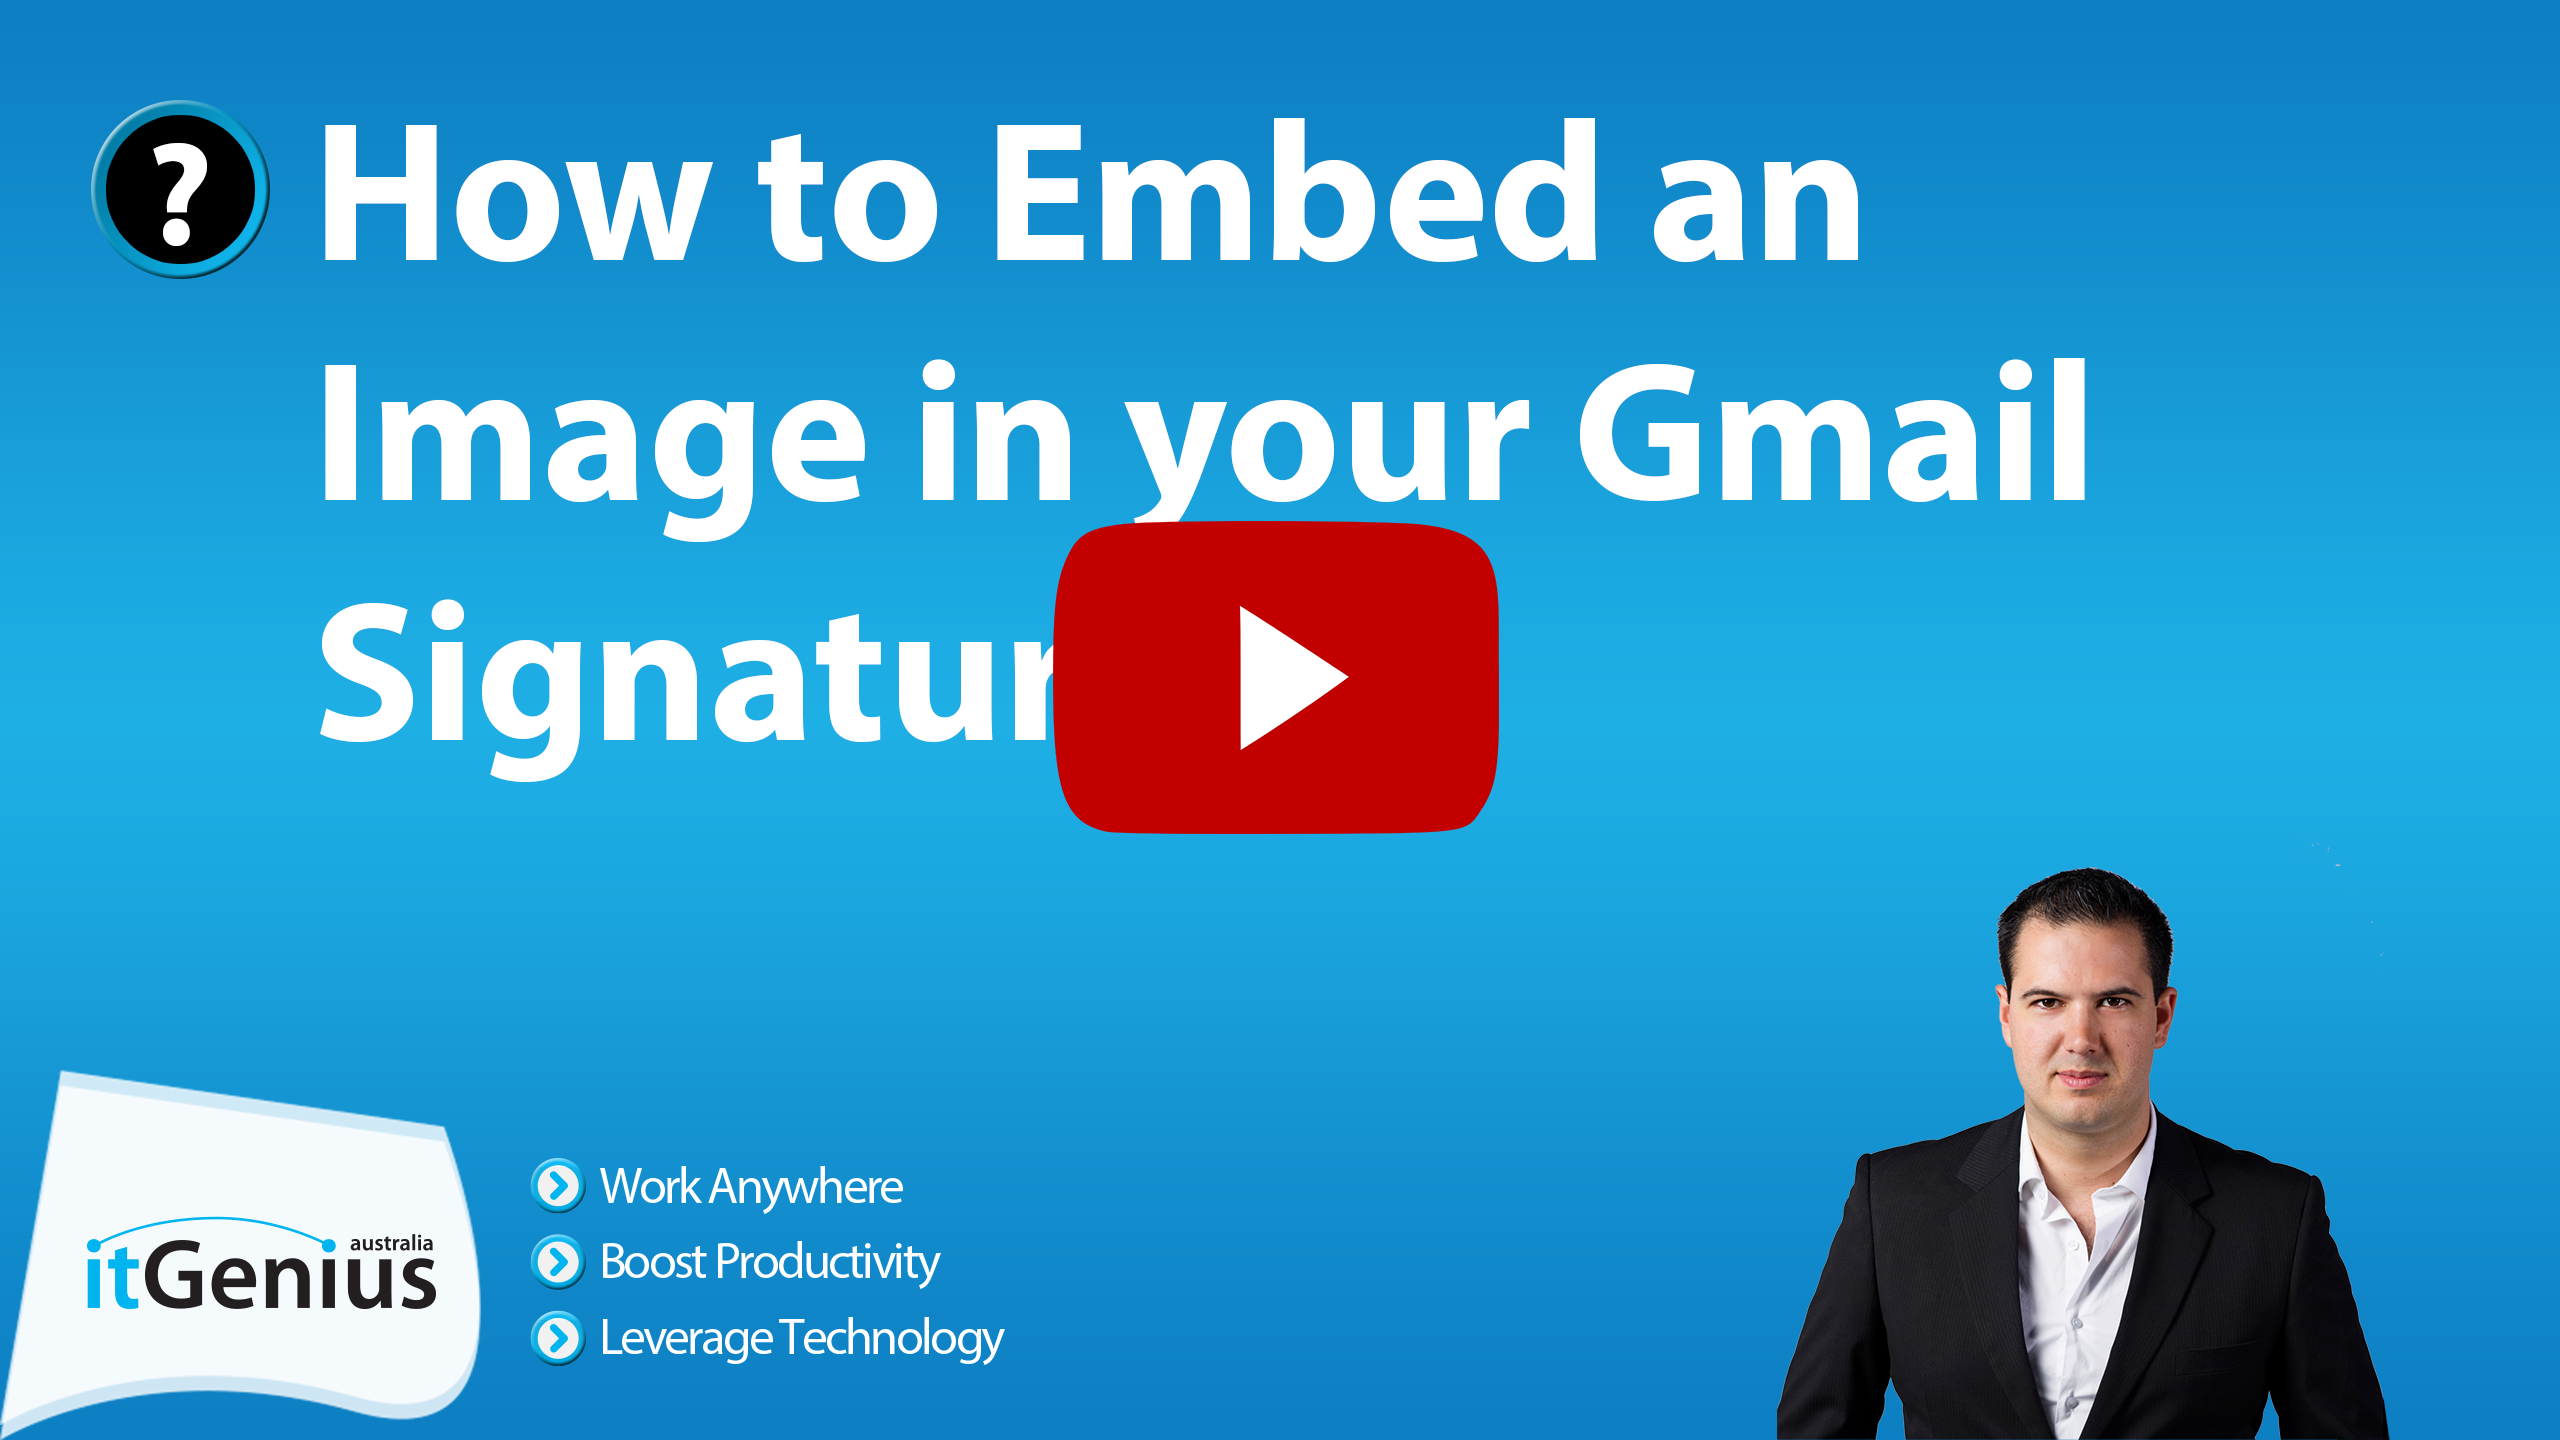 How to Embed an Image in your Gmail Signature